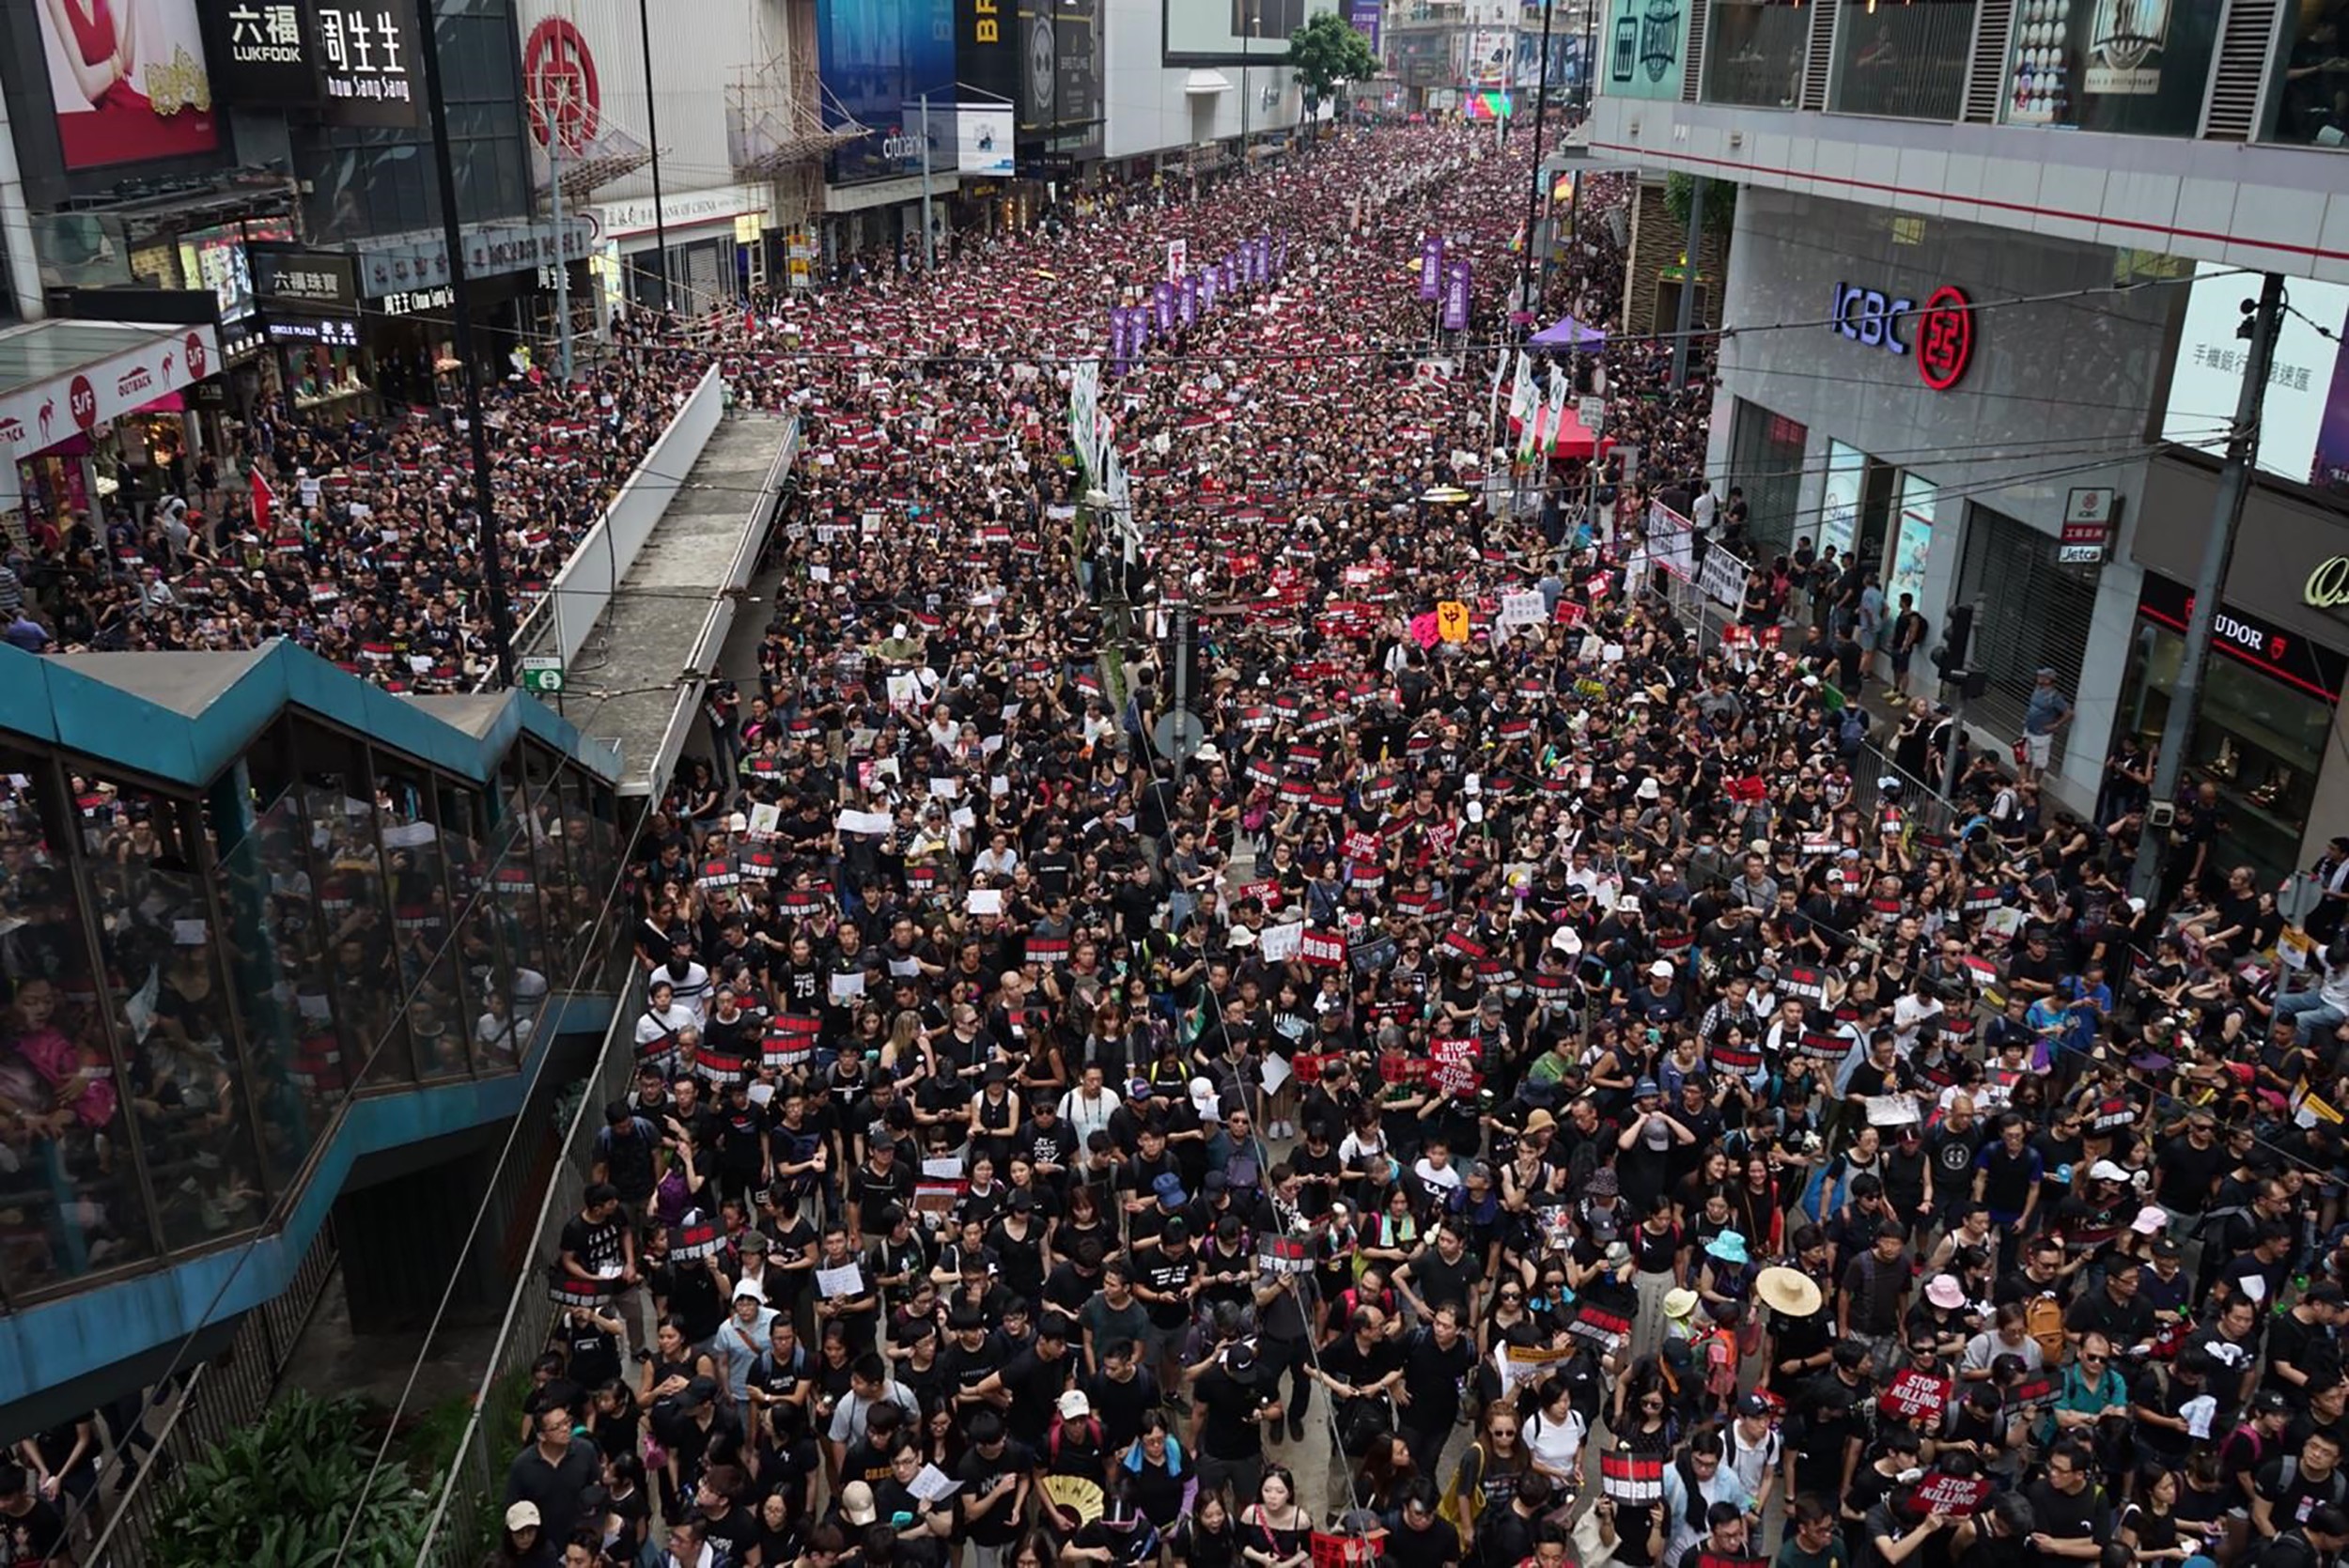 Protesters make their way along Hennessy Road near Causeway Bay in a massive show of solidarity and defiance against the extradition bill, on June 16, 2019. Such protests last month affected retail sales in the city. Photo: Joanne Ma